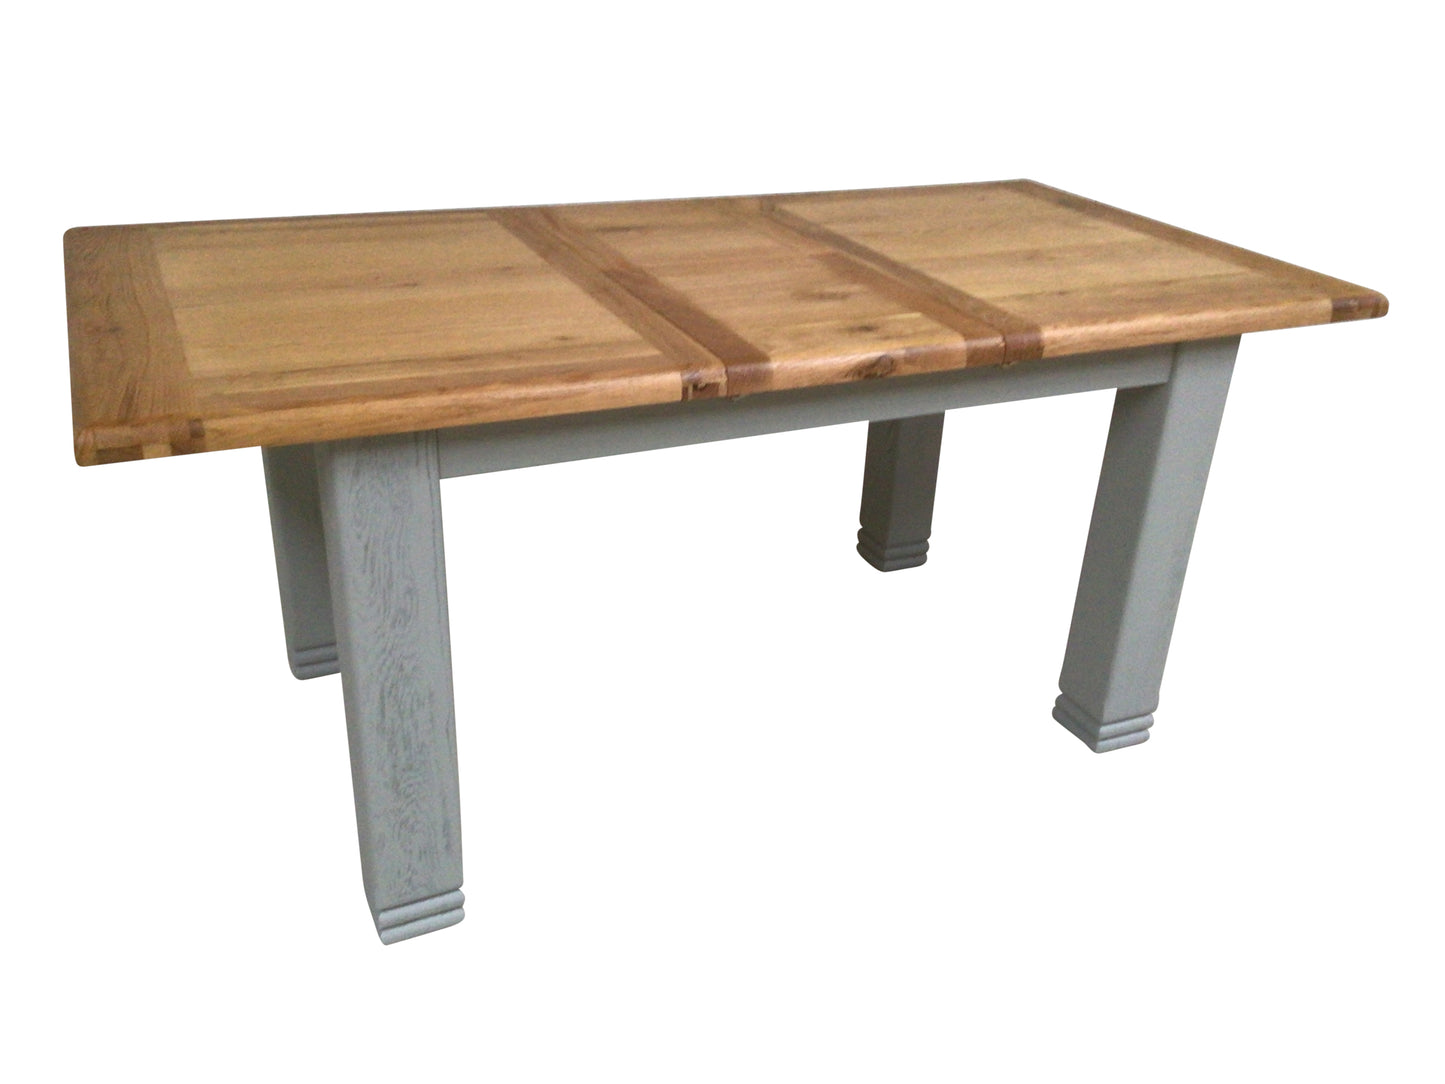 Danube Weathered Oak 1.4m Extension Table painted French Grey